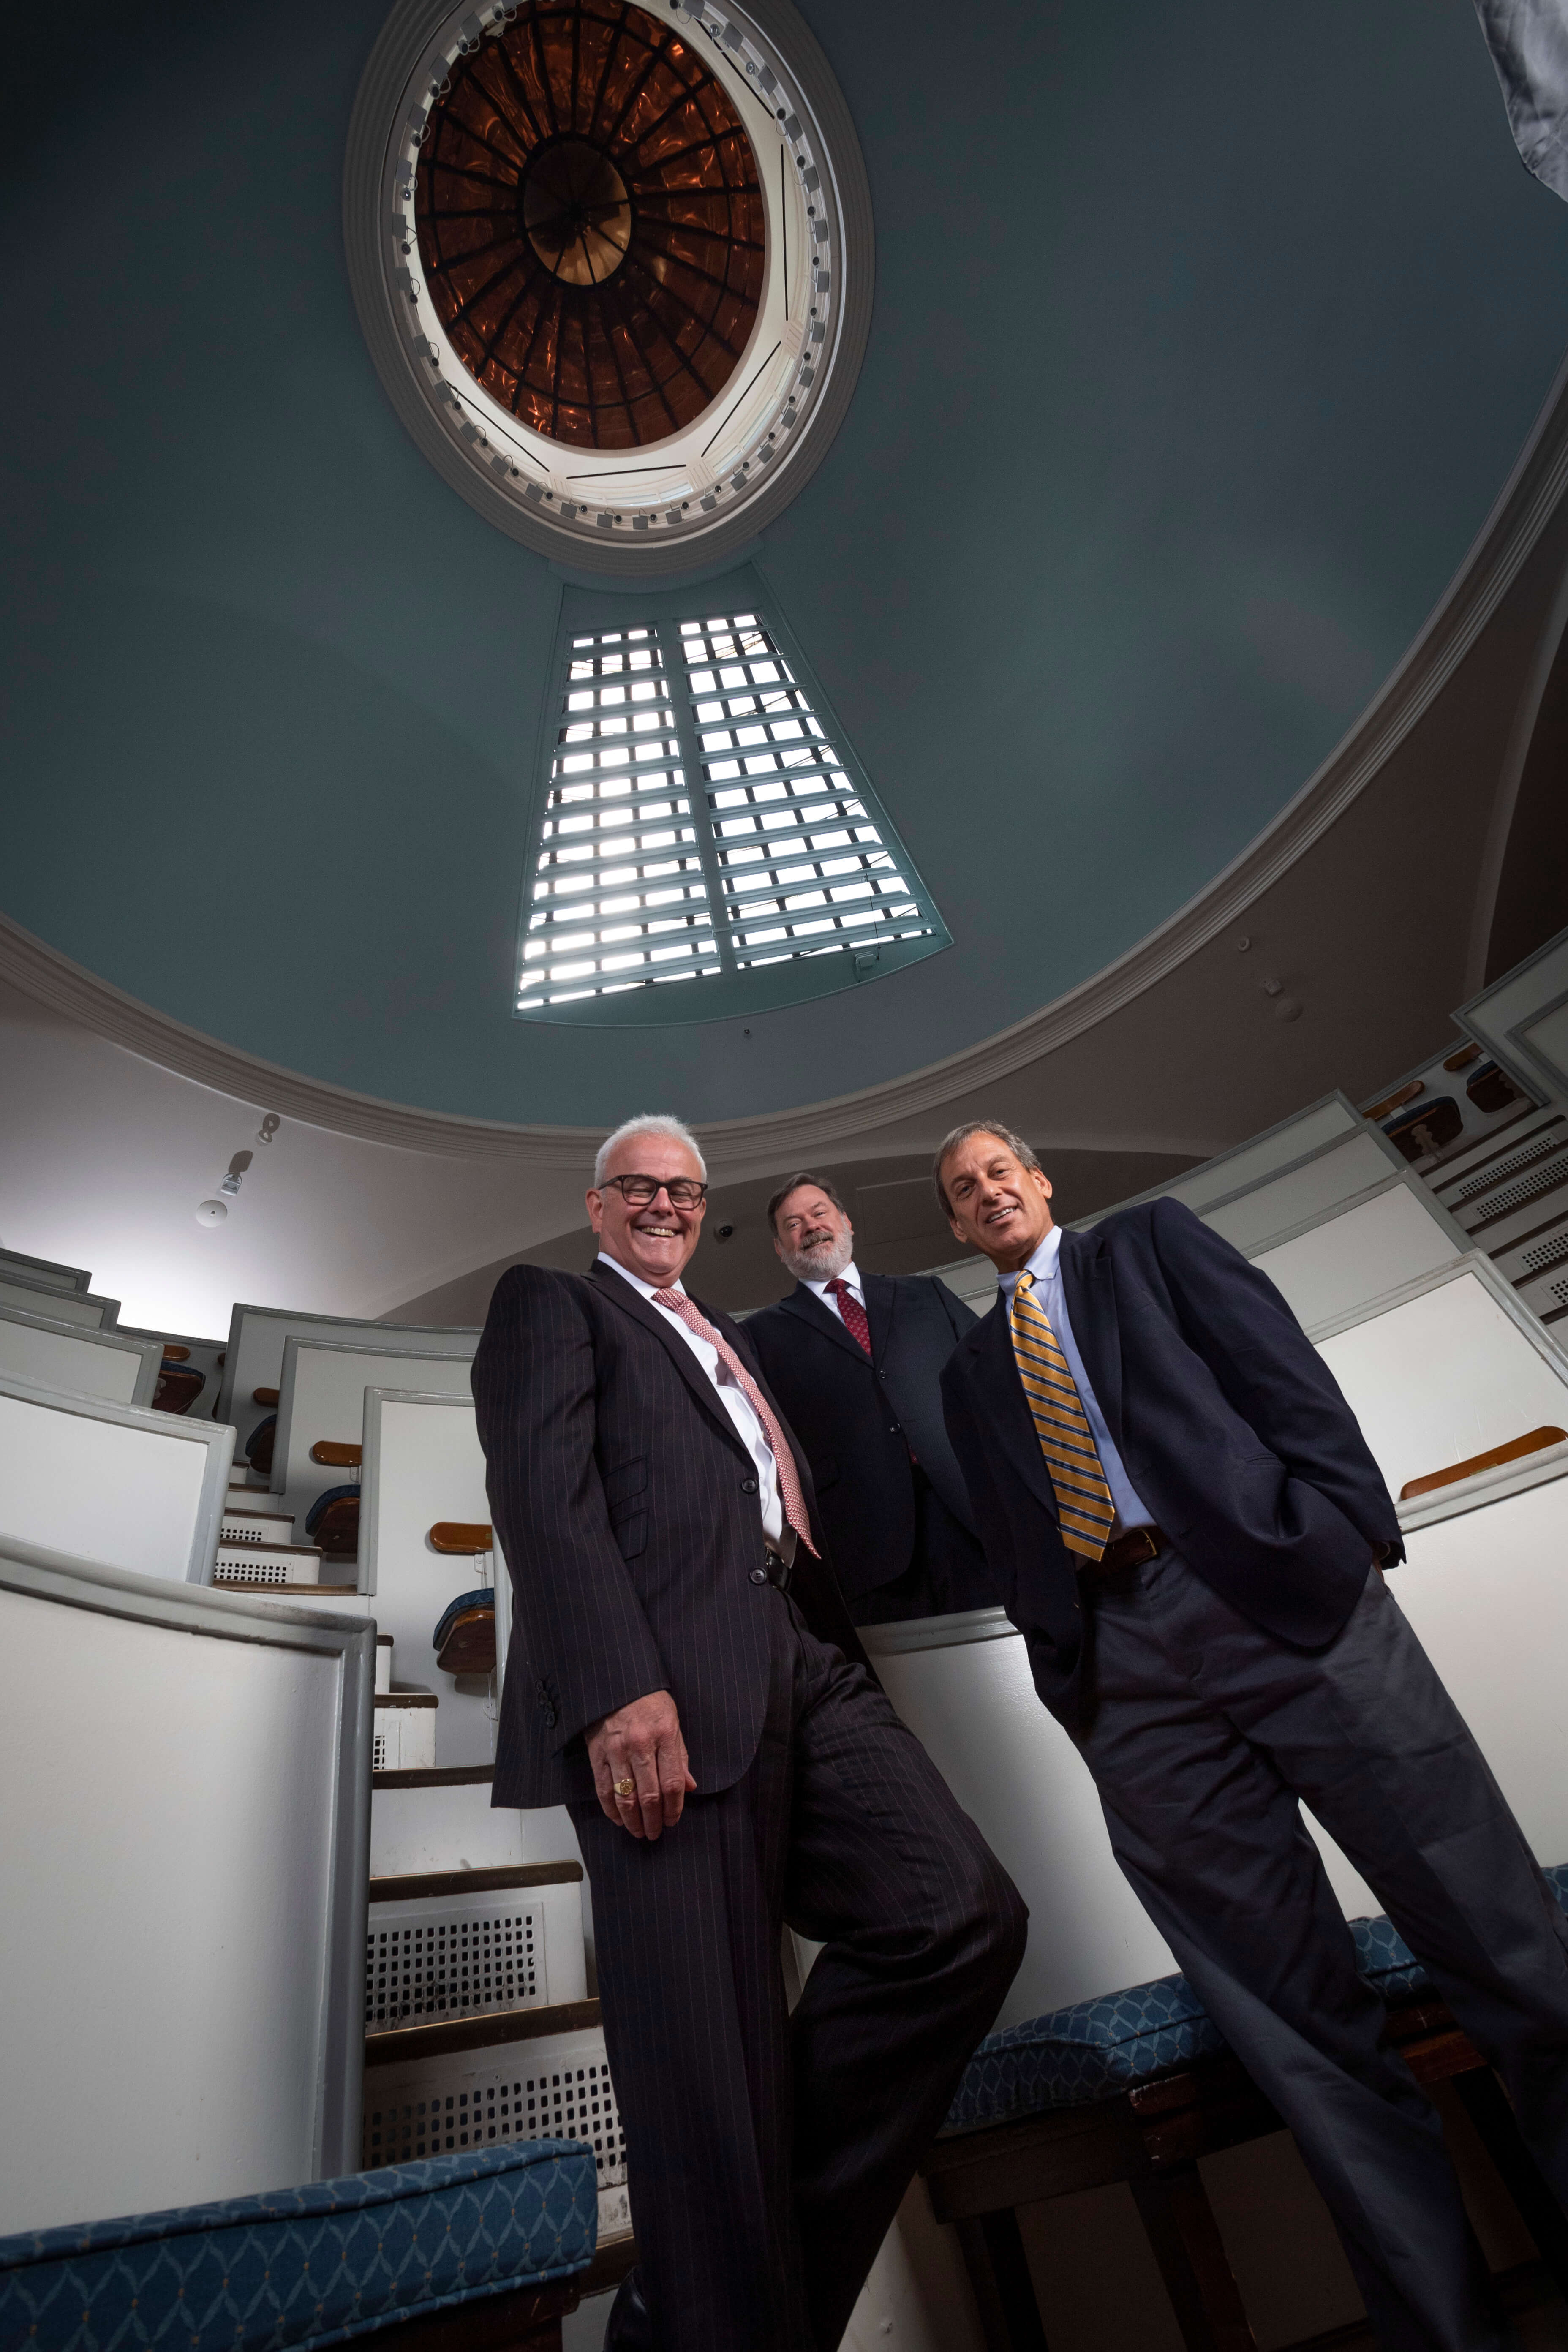 Dr. Raines, Dr. Denman and Dr. Goldman pictured with the Ether Dome's glass ceiling overhead